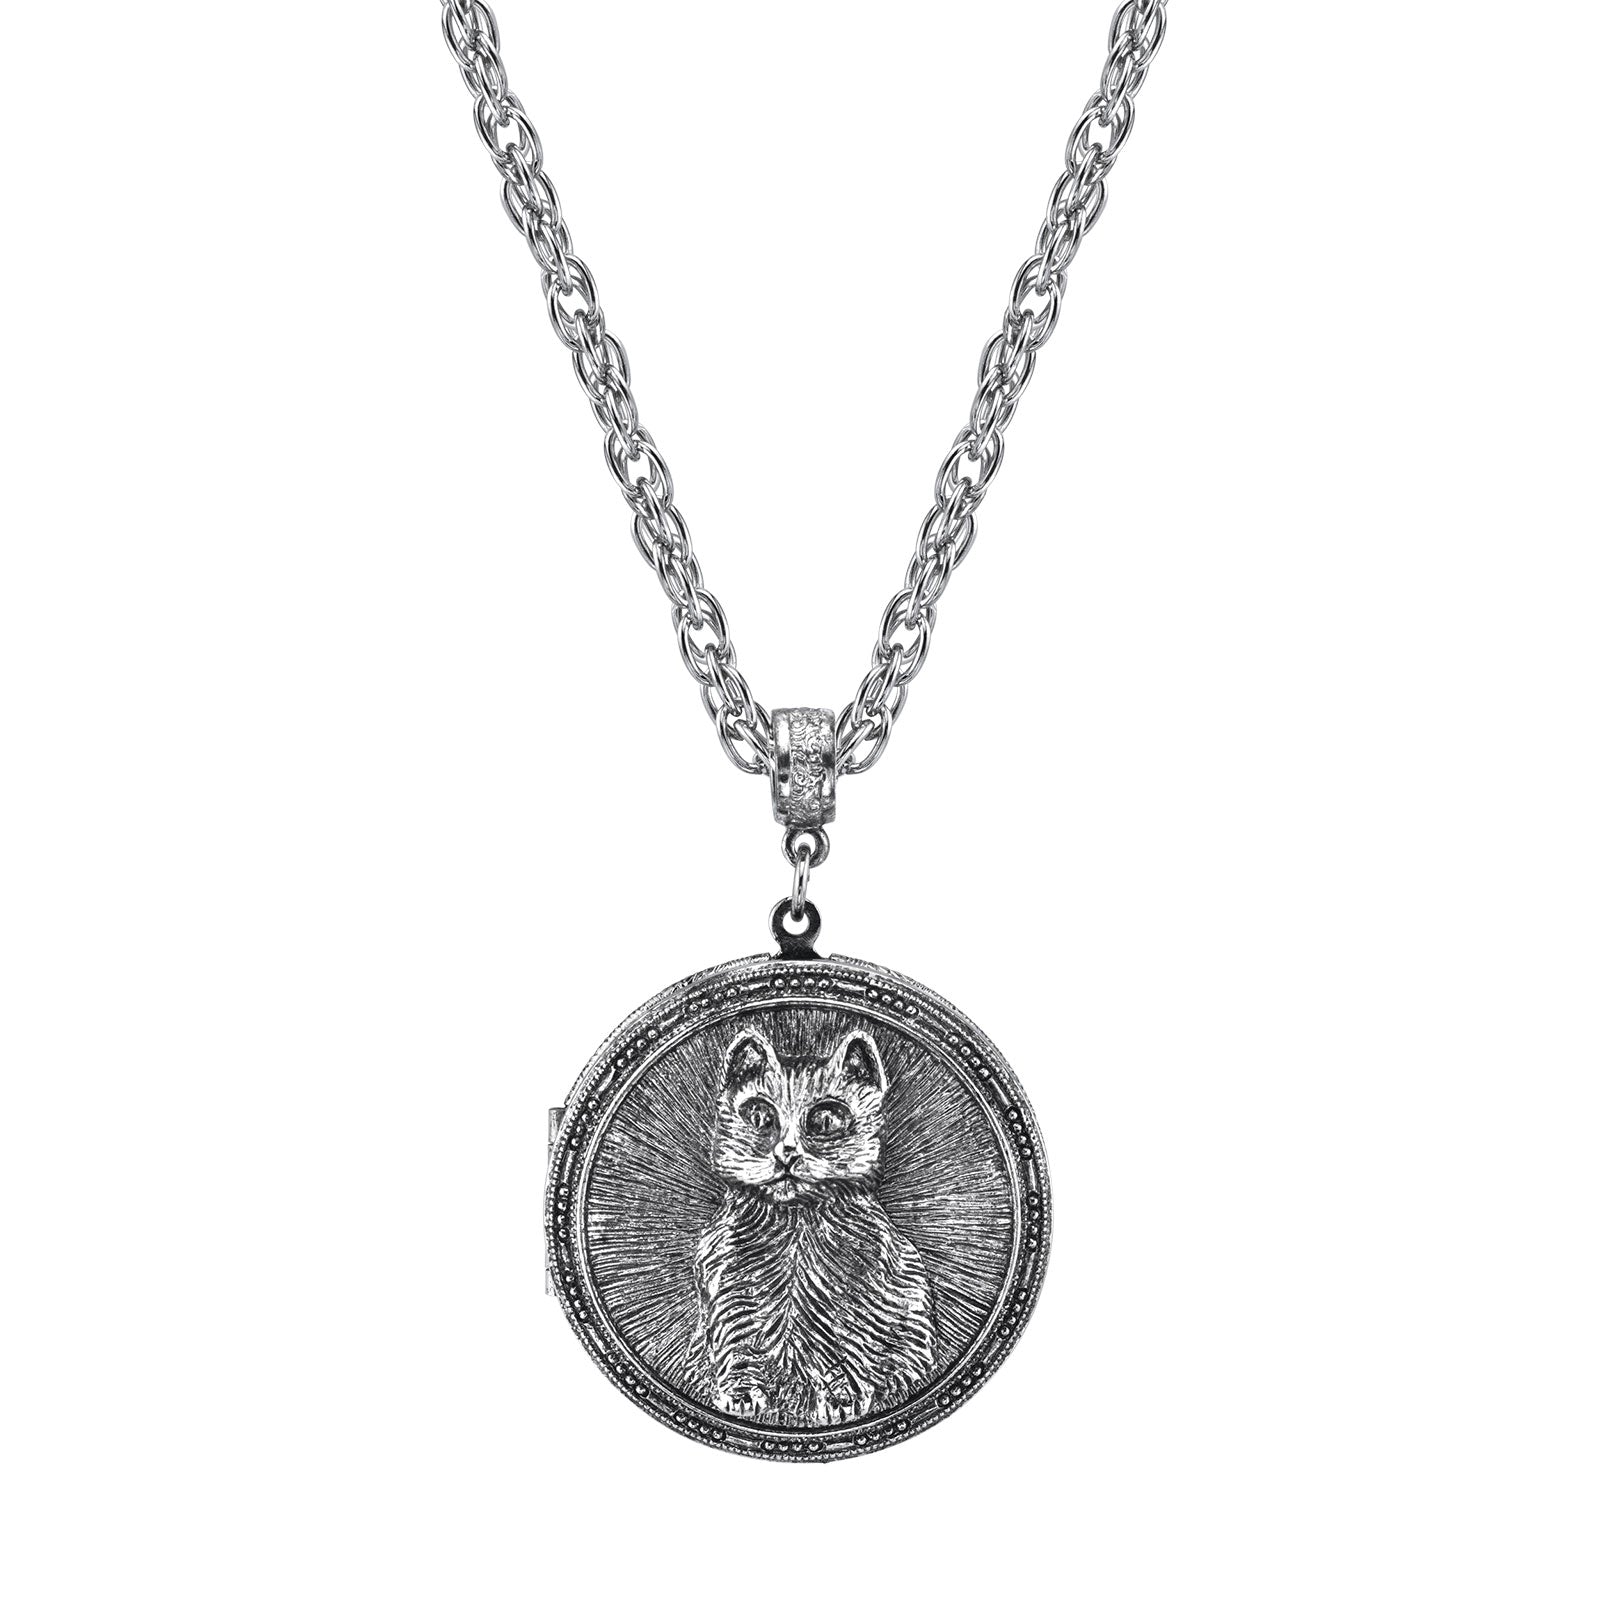 Pewter Cat Locket Necklace 30in